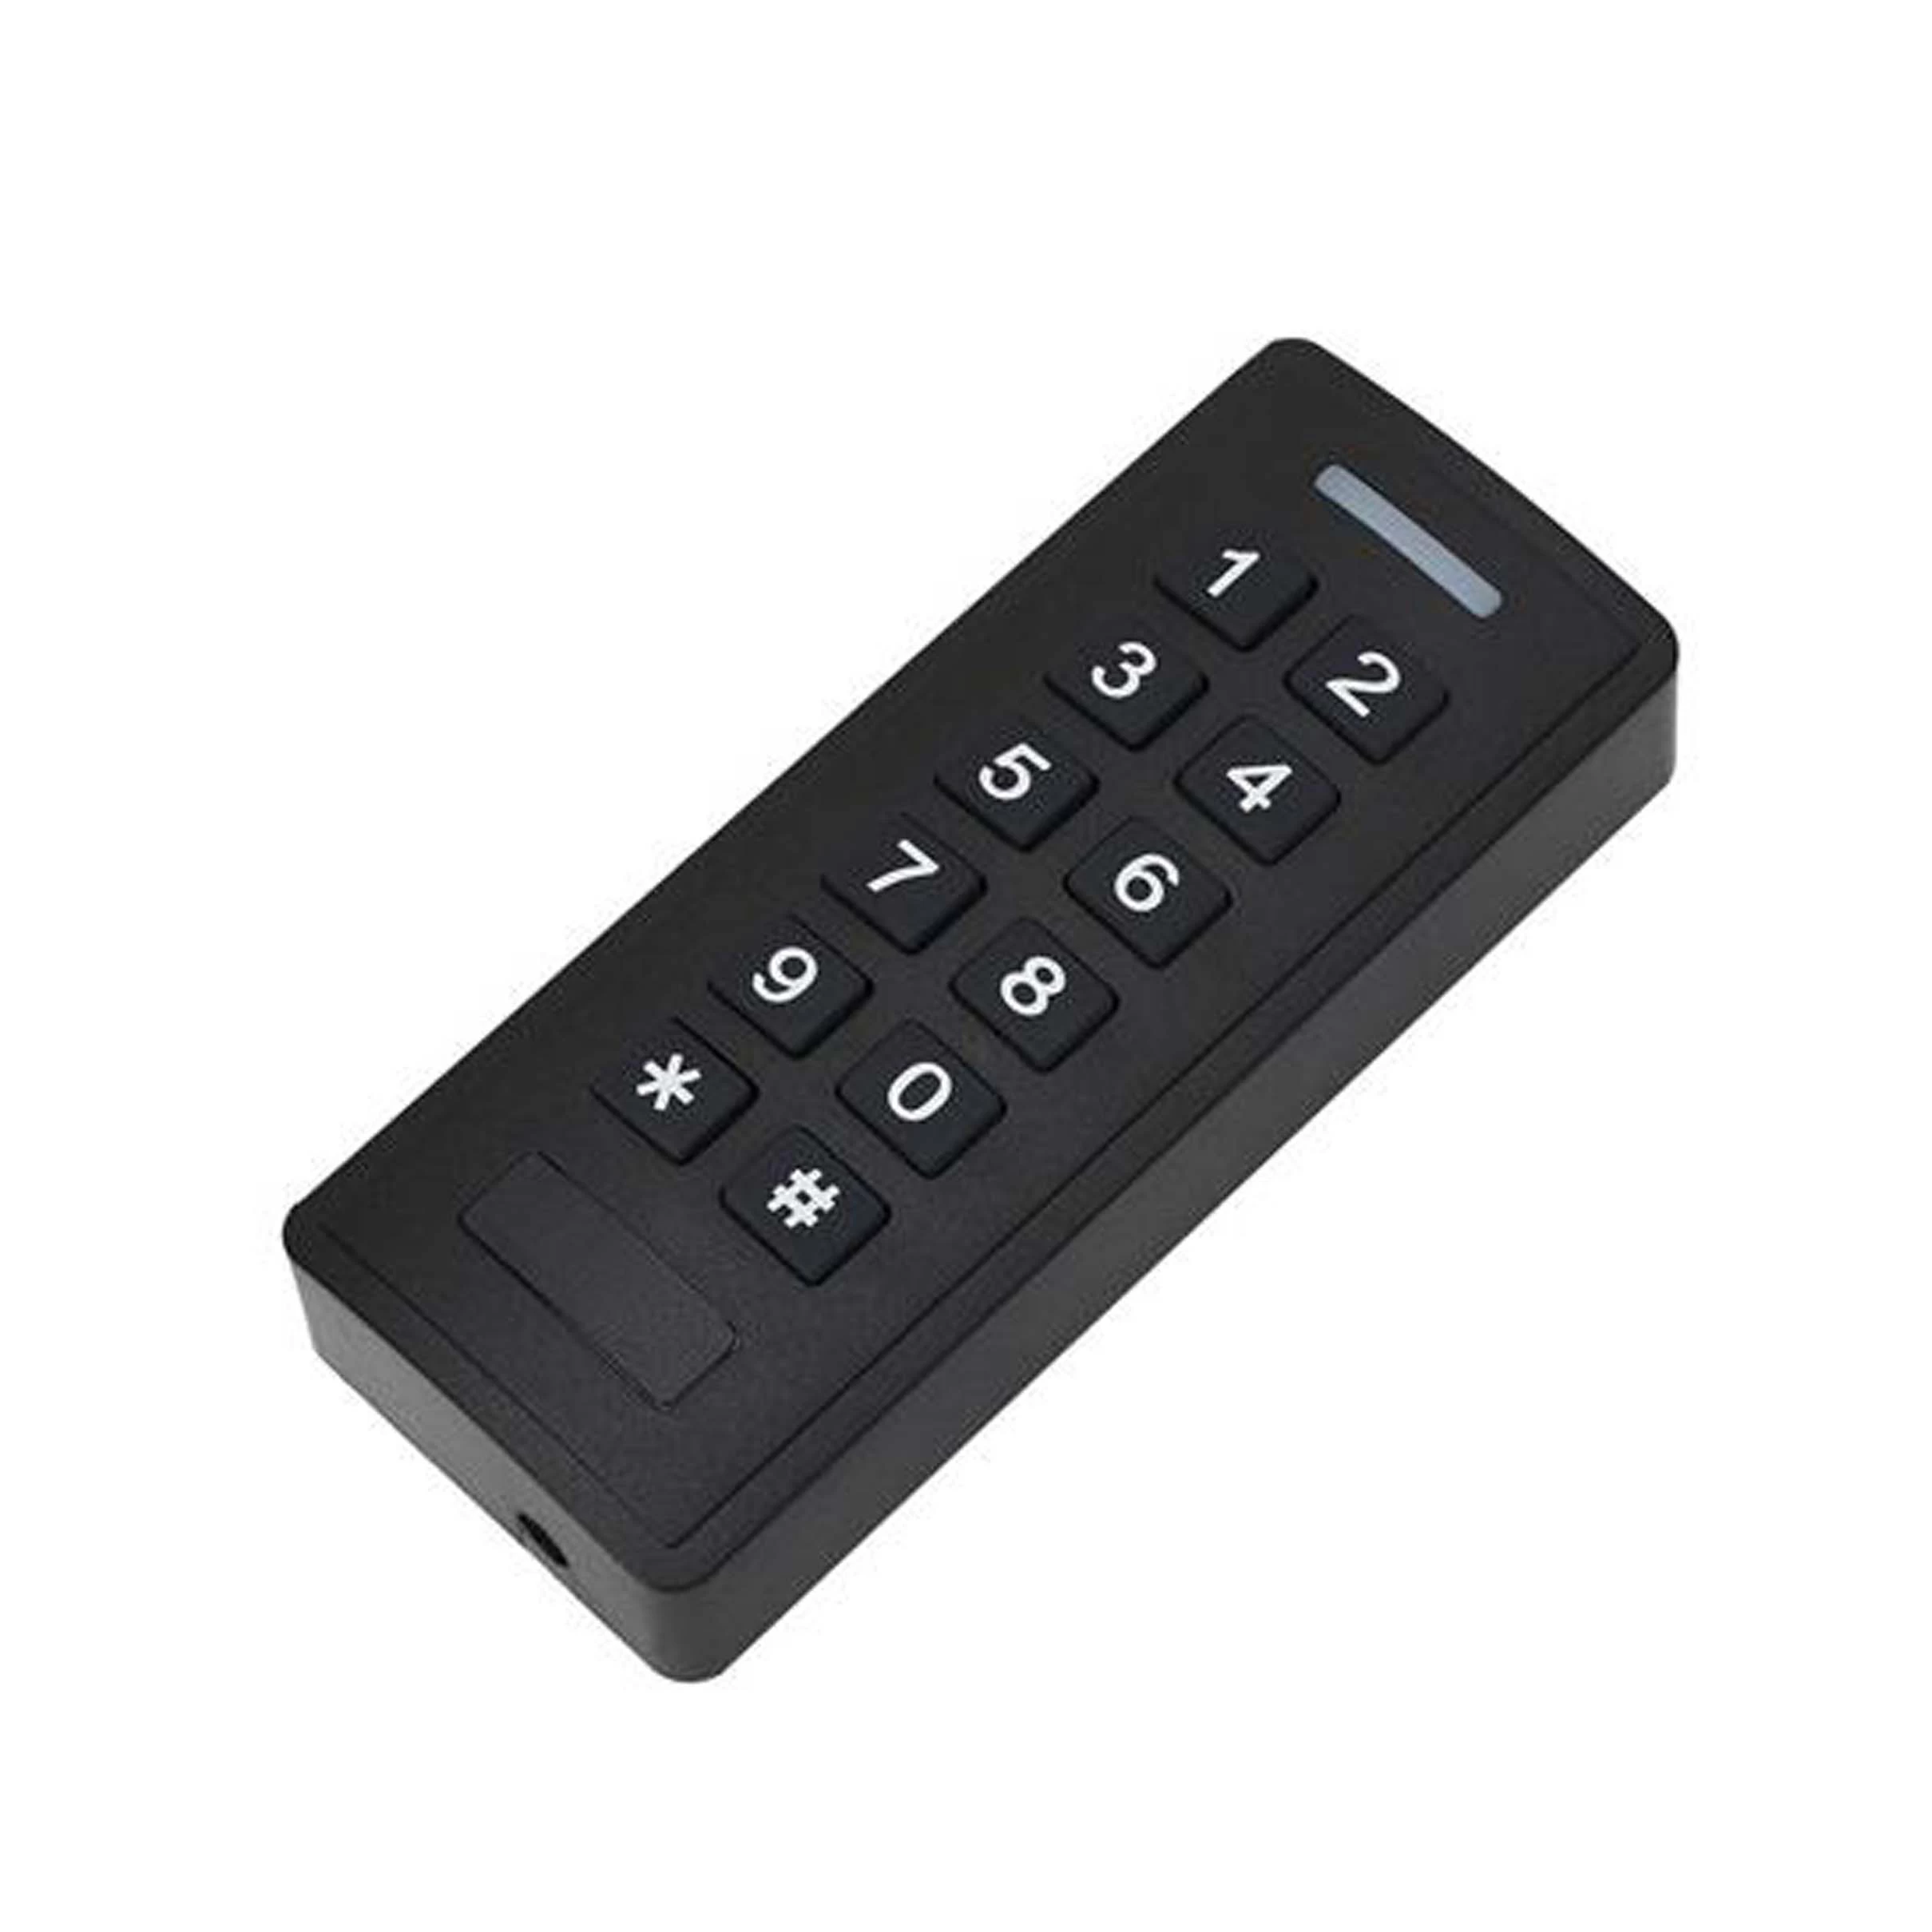 Whole sale dual frequency RFID reader 125KHz/13.56MHz